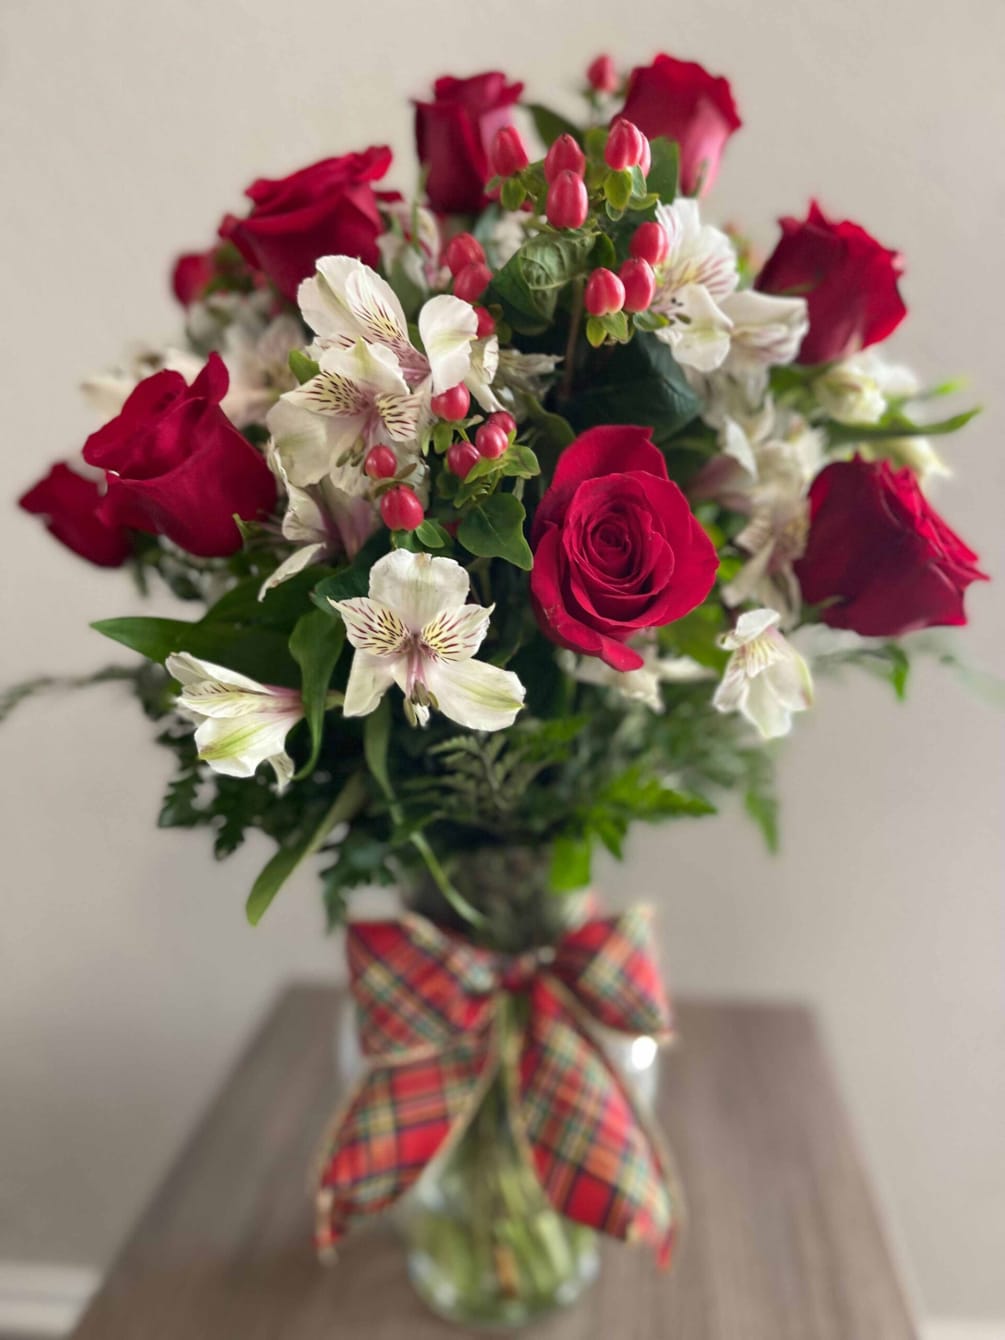 Introducing a delightful floral bouquet with beautiful seasonal colors. The arrangement showcases